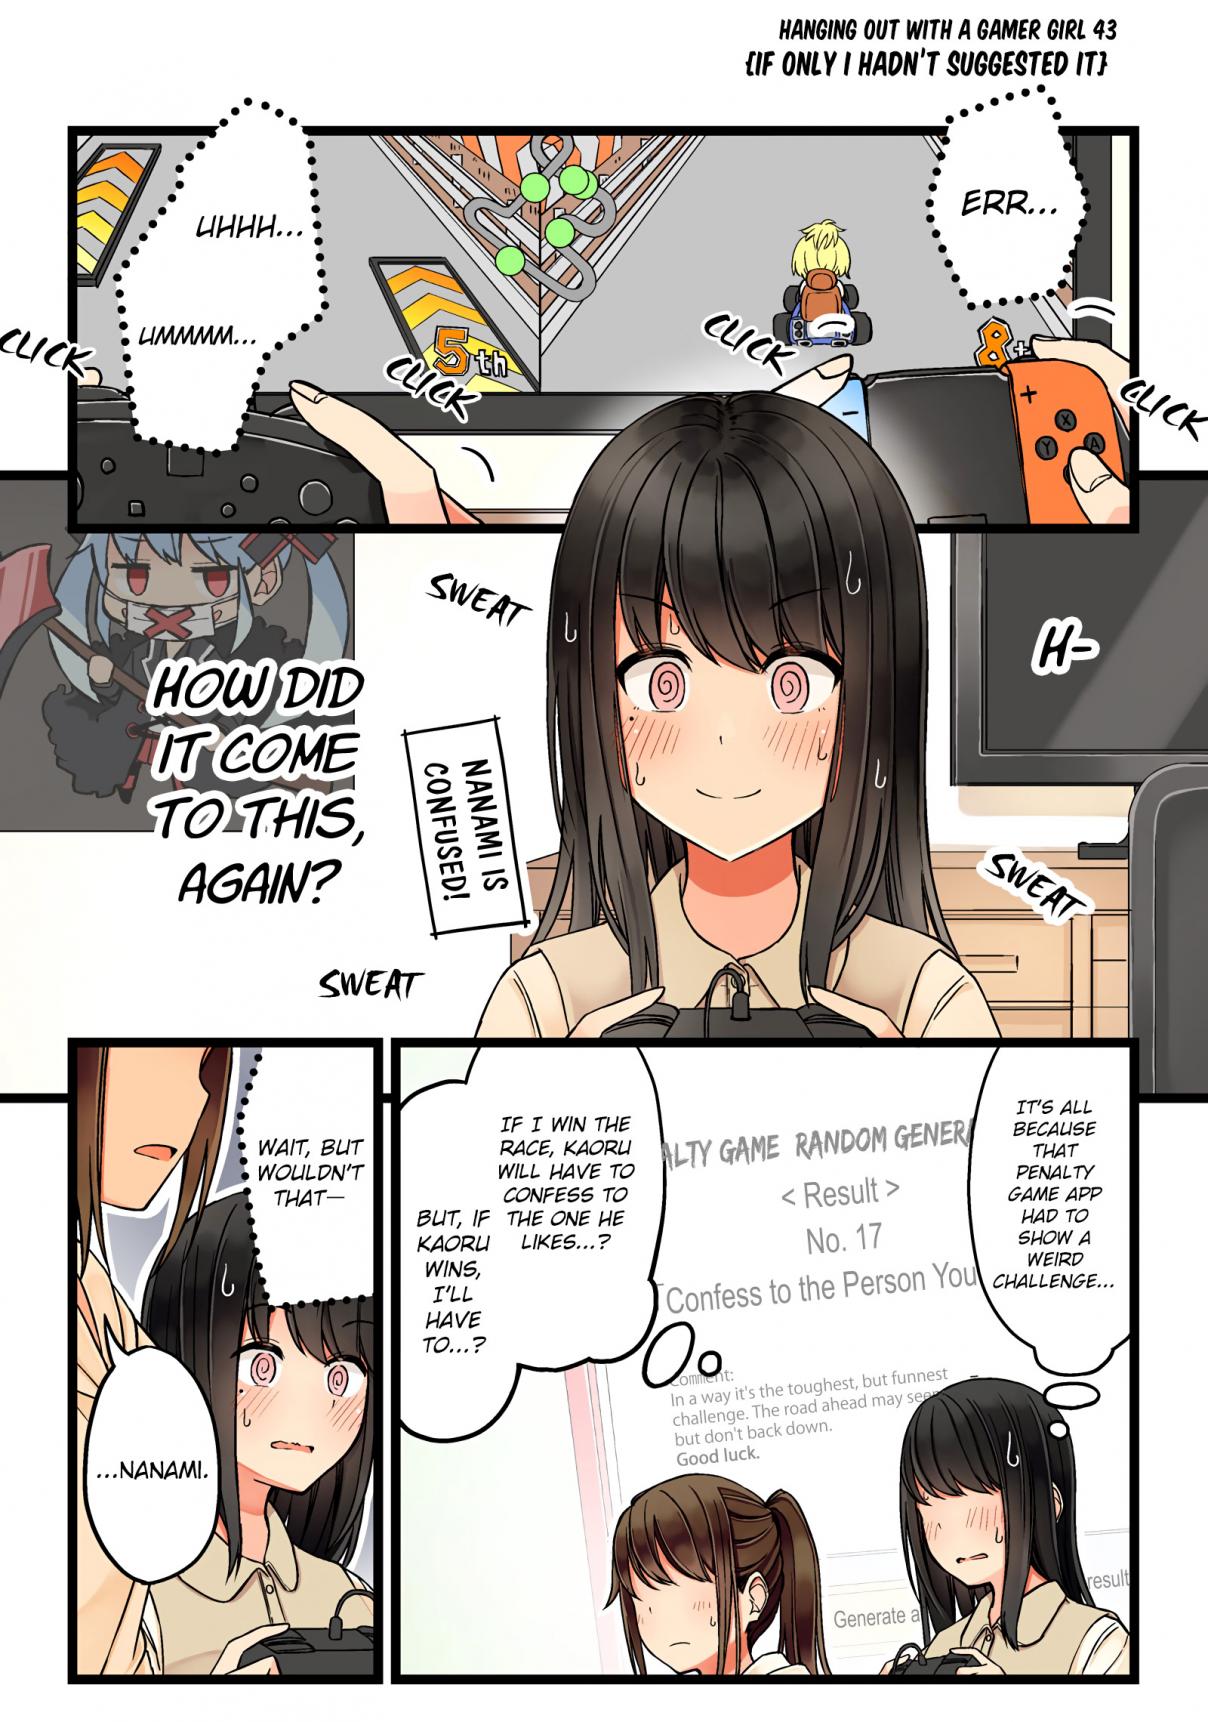 Hanging Out with a Gamer Girl Ch. 43 If Only I Hadn't Suggested It